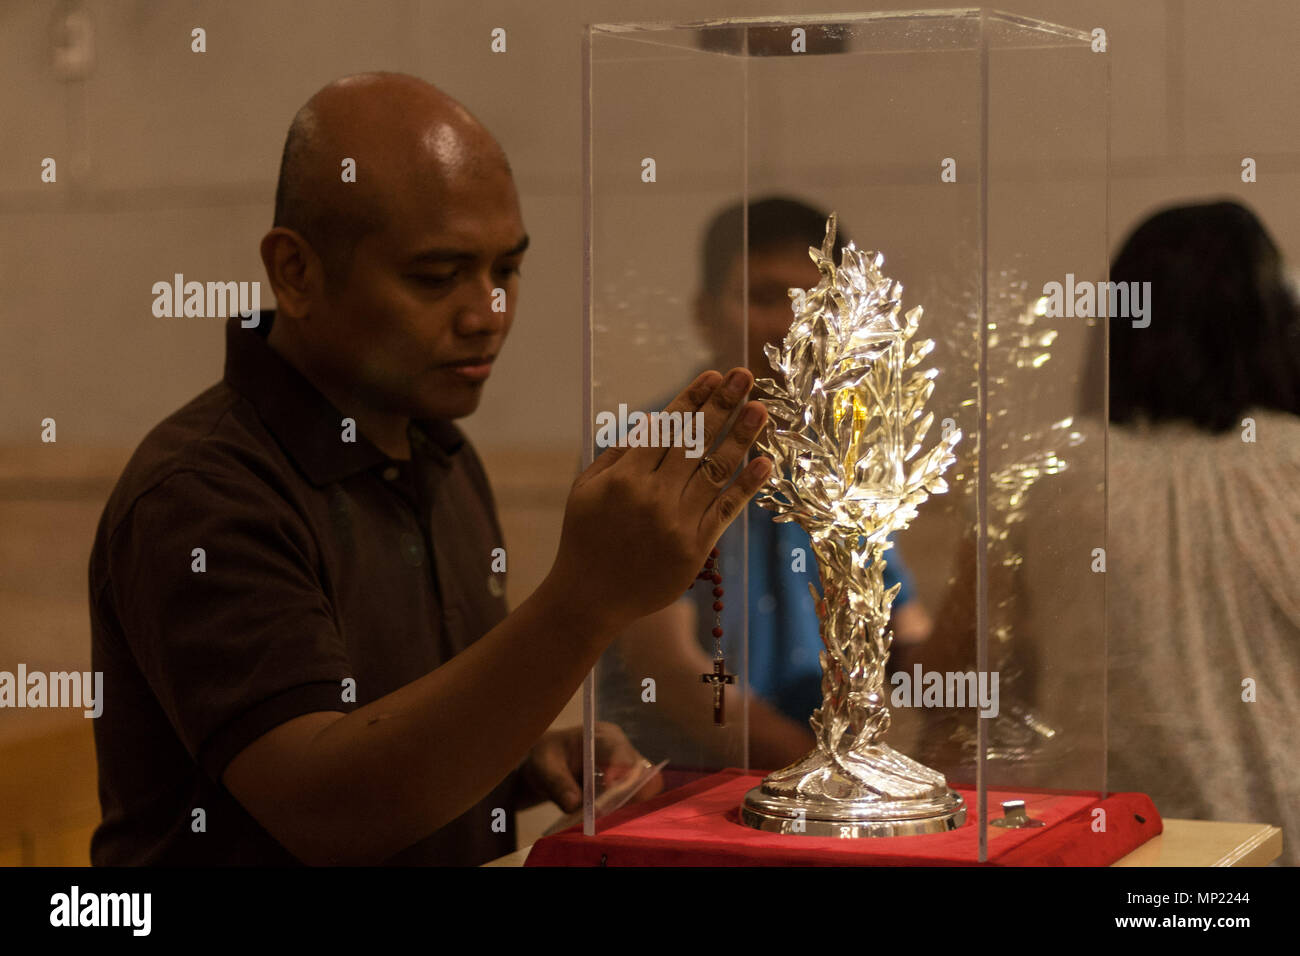 Philippines. 20th May, 2018. Devotees pray as they touch the glass encasement of the blood reliquary. The Manila Cathedral in Intramuros displayed the blood relic of Pope John Paul II for public veneration. The blood was extracted from Pope John Paul II during his battle from Parkinson's disease, in case the Pope needed an emergency transfusion. Credit: J Gerard Seguia/ZUMA Wire/Alamy Live News Stock Photo